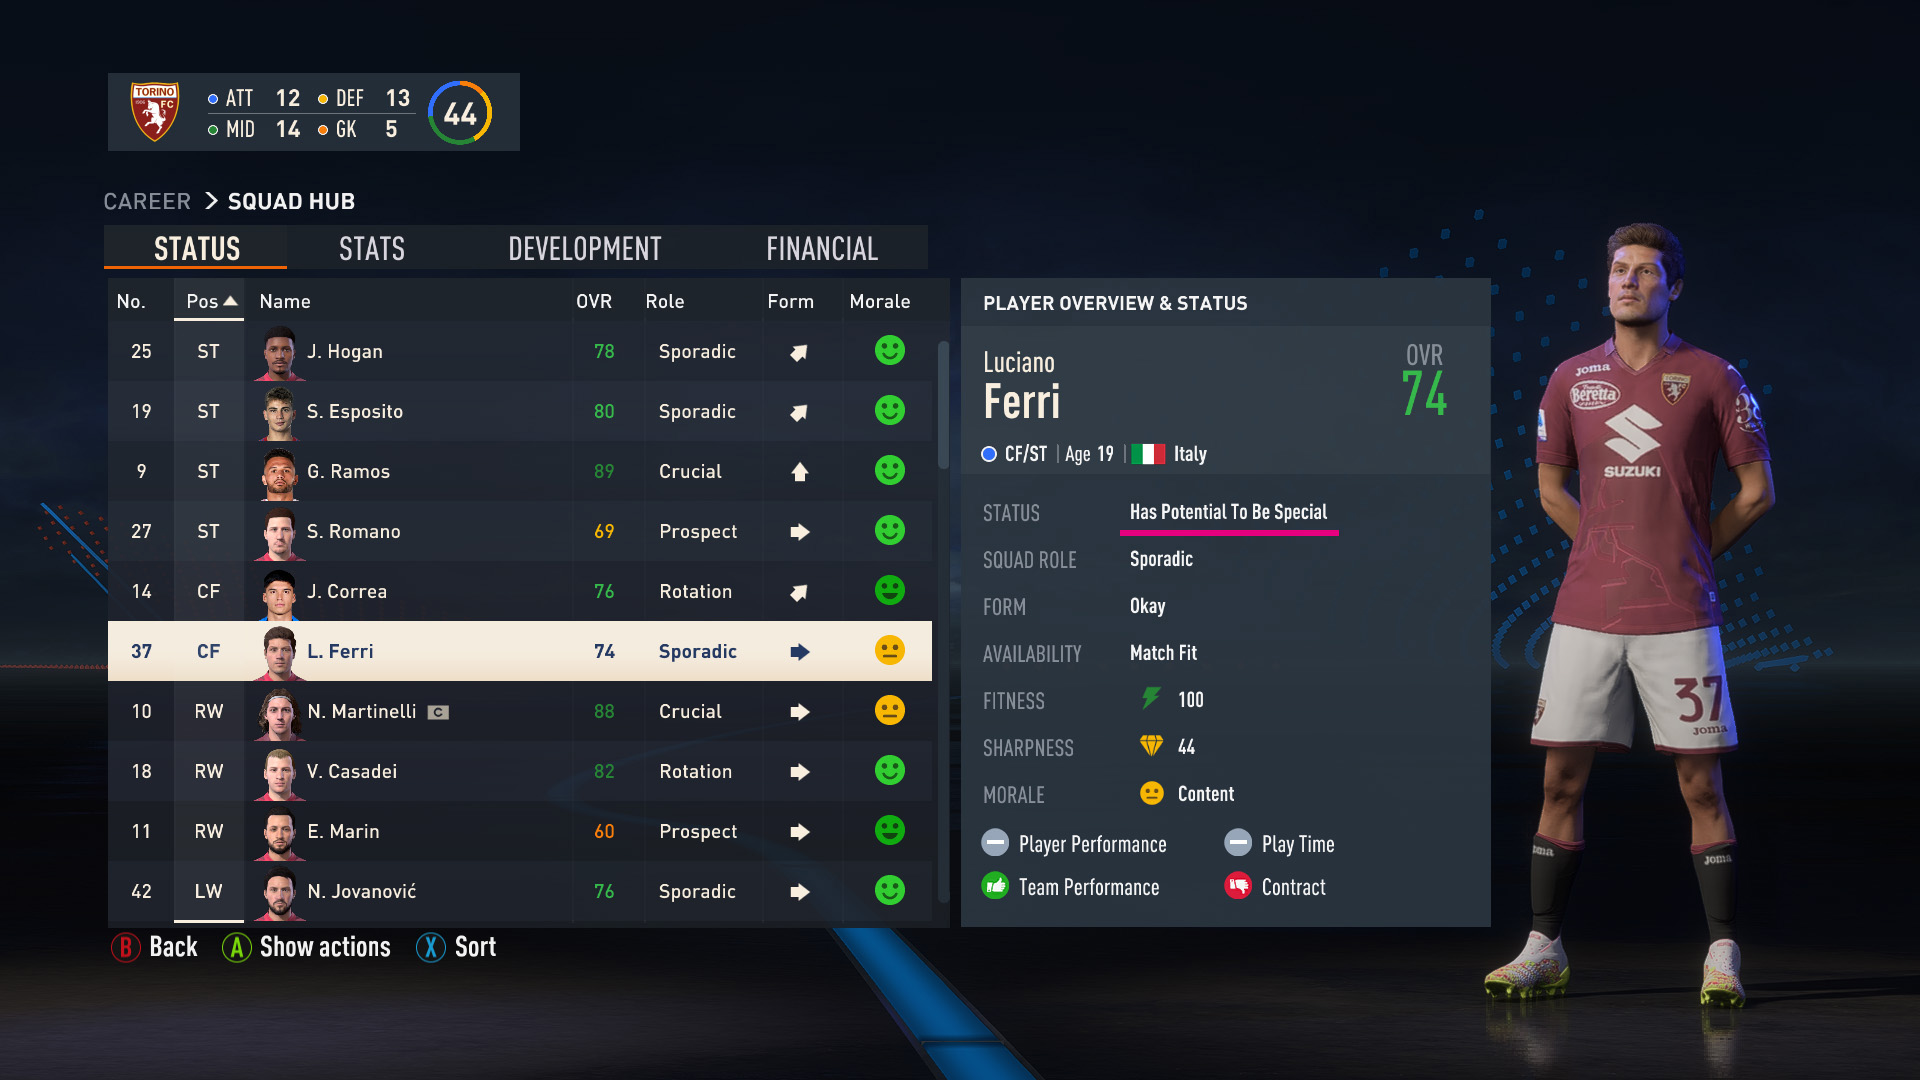 Best player career modes to on FIFA Career Mode, #fyp #viral #fifa #c, best player career mode fifa 23